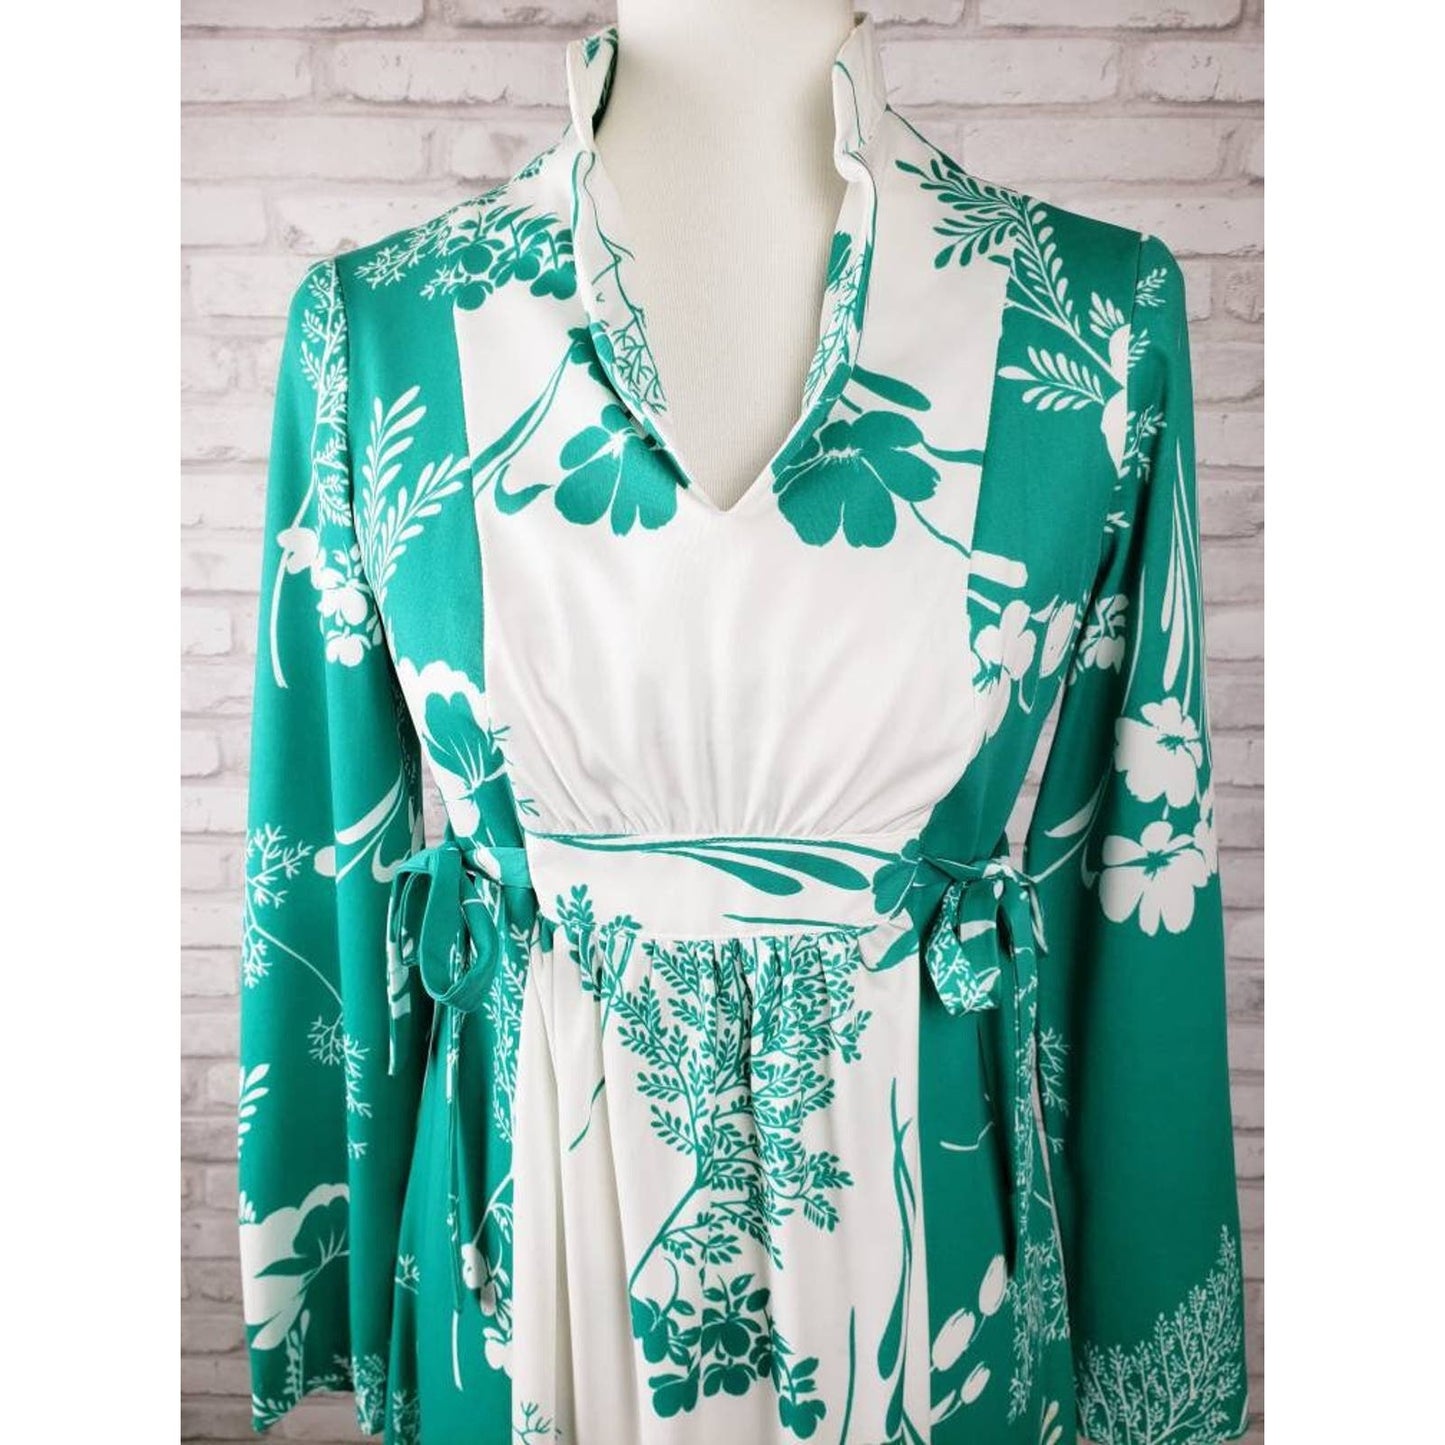 Yves Jennet dress jade green floral dress with contrast panel and cute side ties, size M 38-inch bust, 1970s double knit polyester